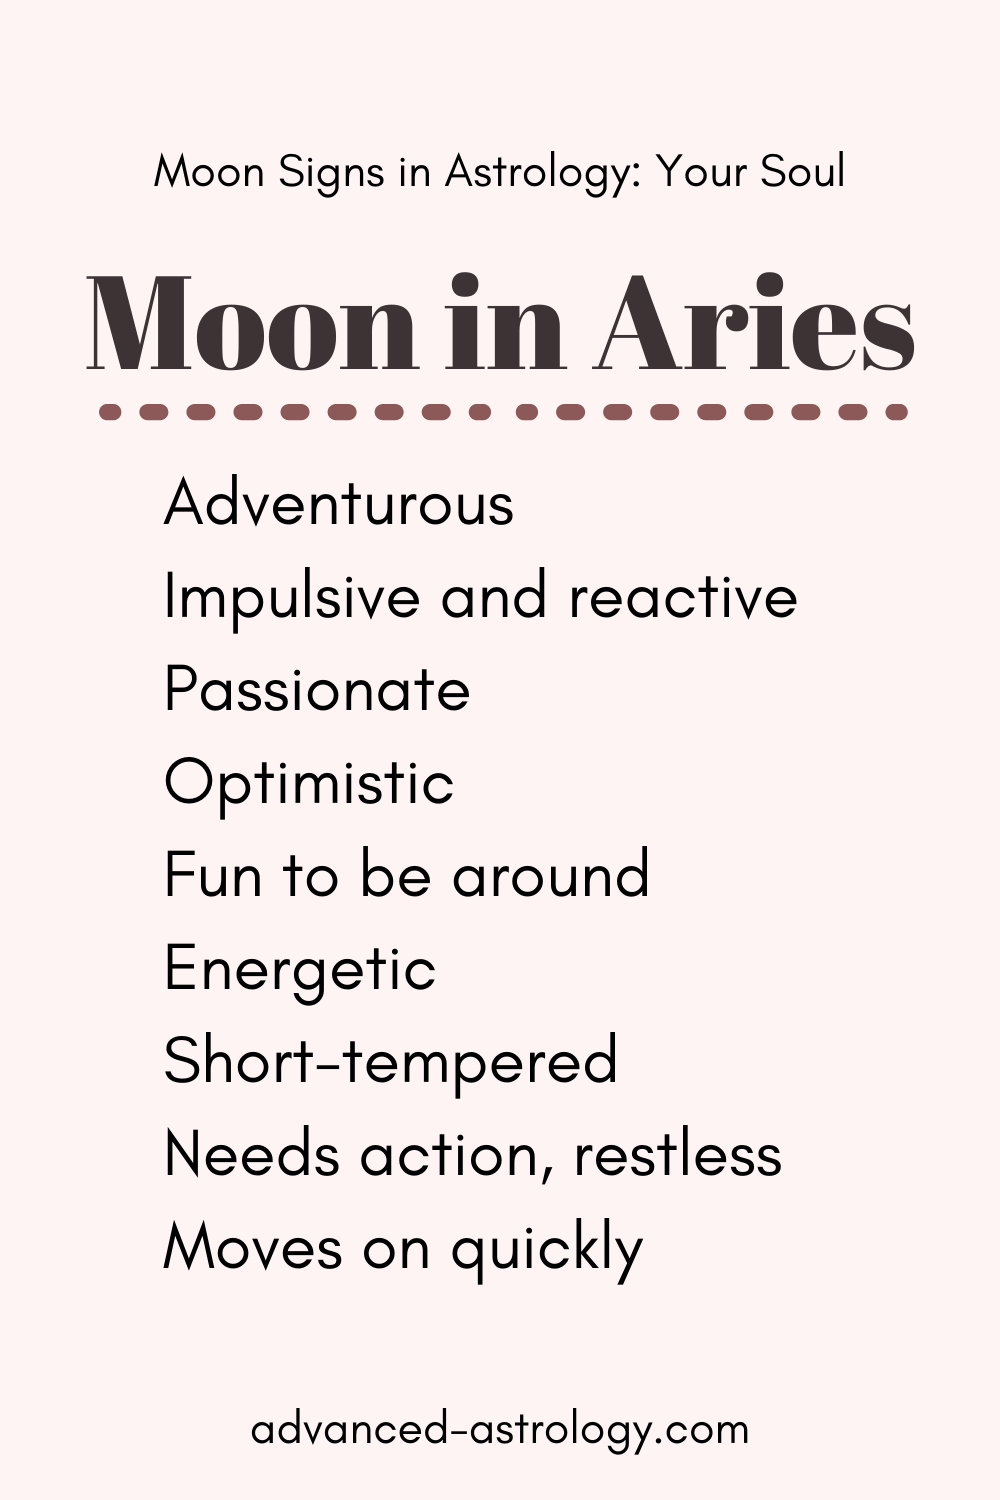 Moon in Aries Traits, Strengths, Weaknesses Your Soul and Deep Urges